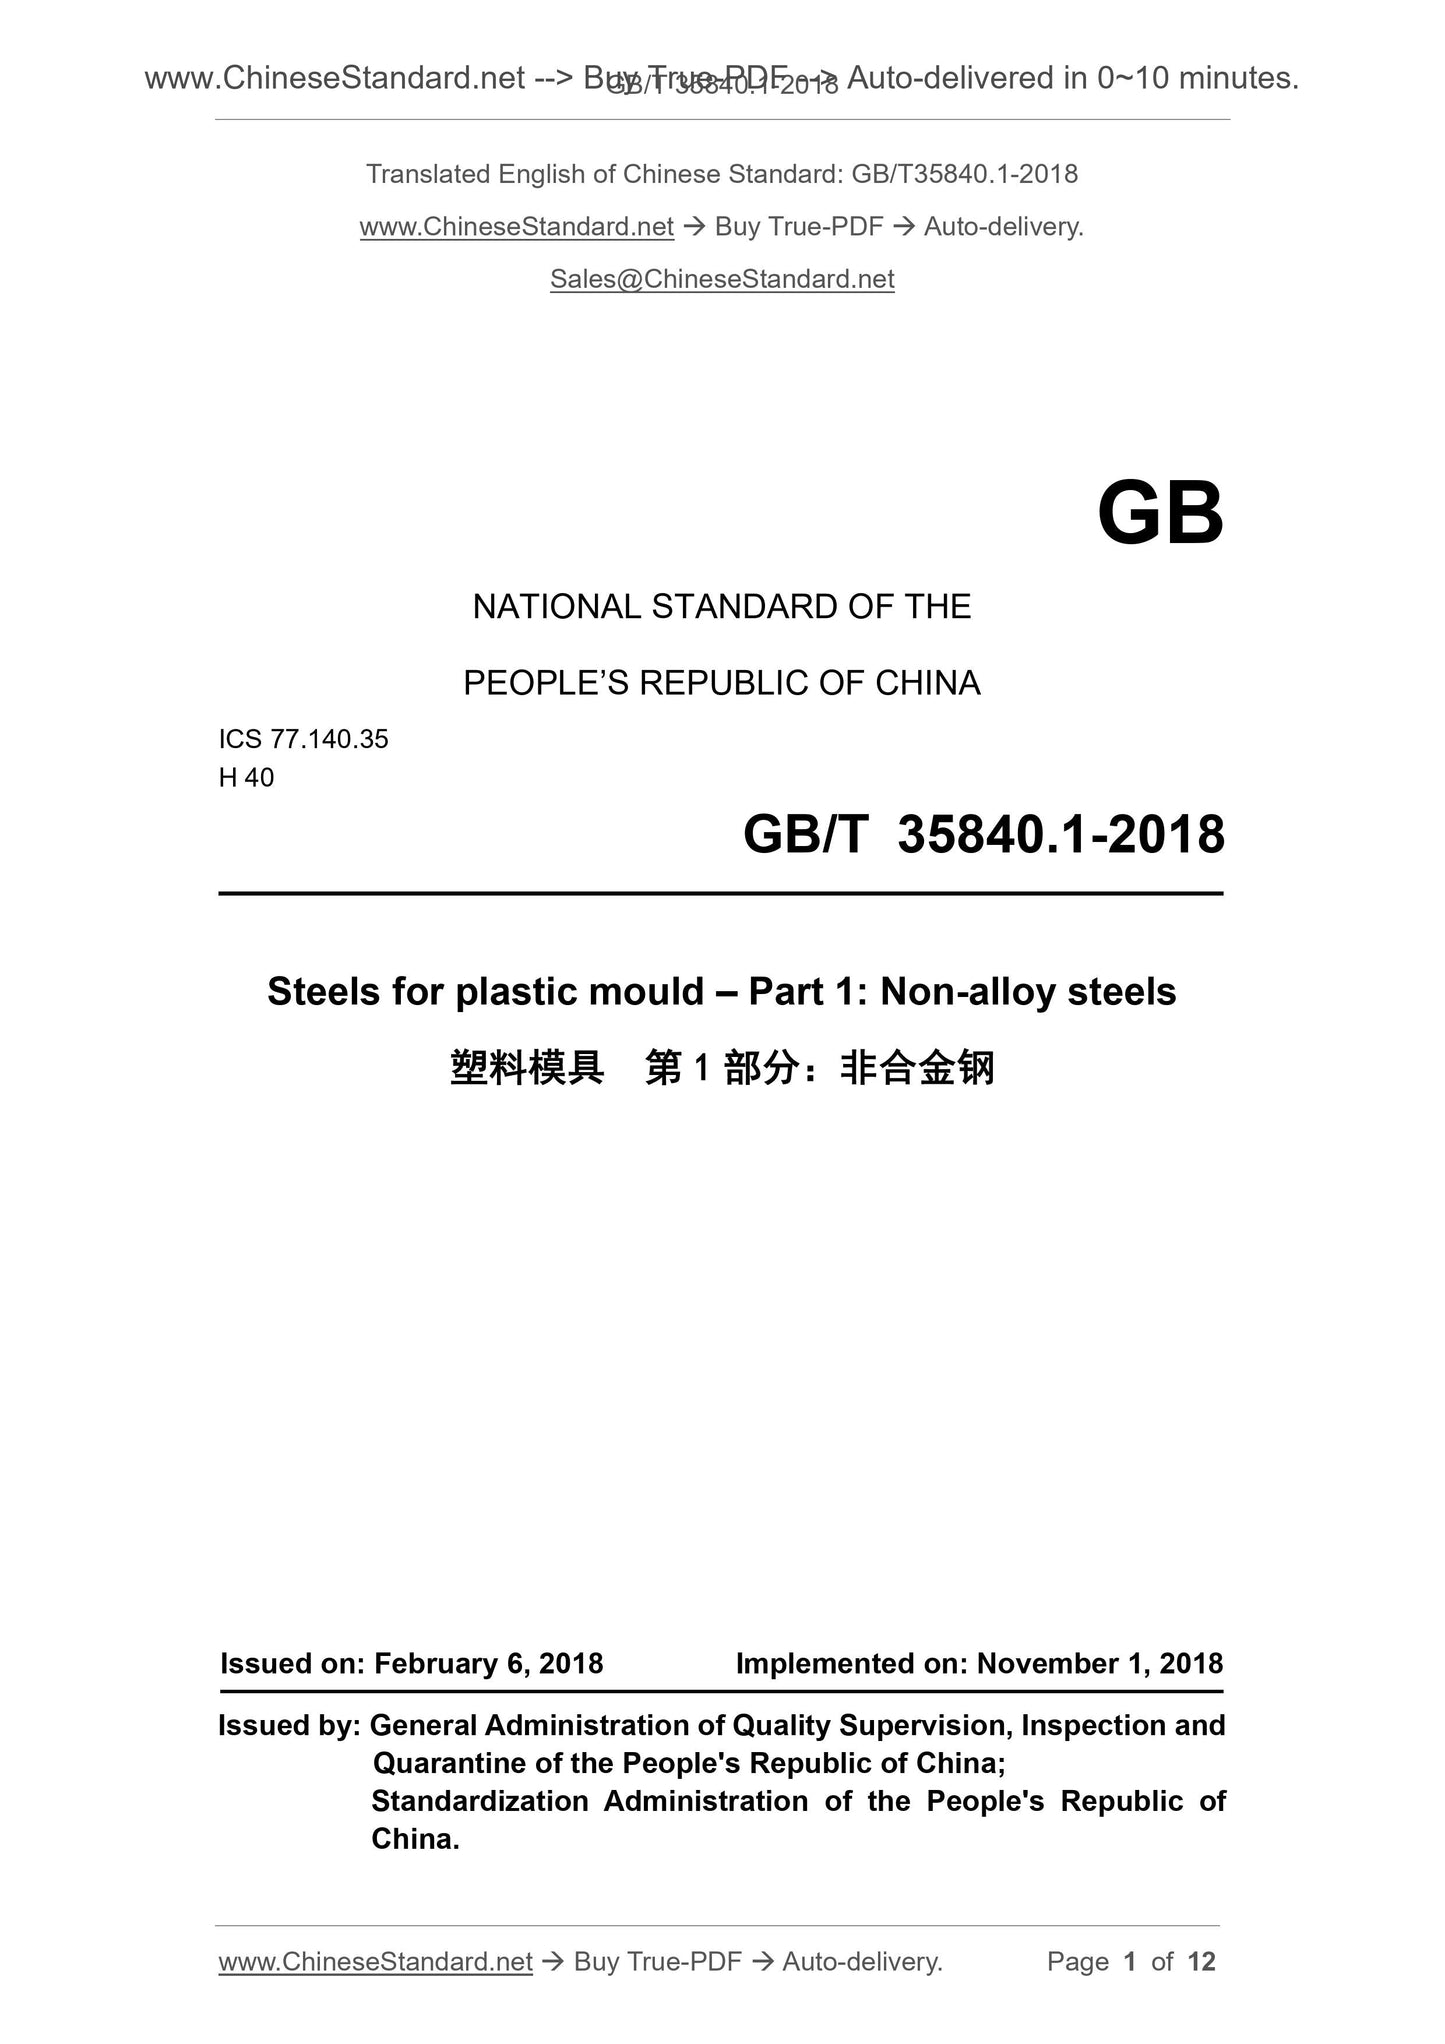 GB/T 35840.1-2018 Page 1